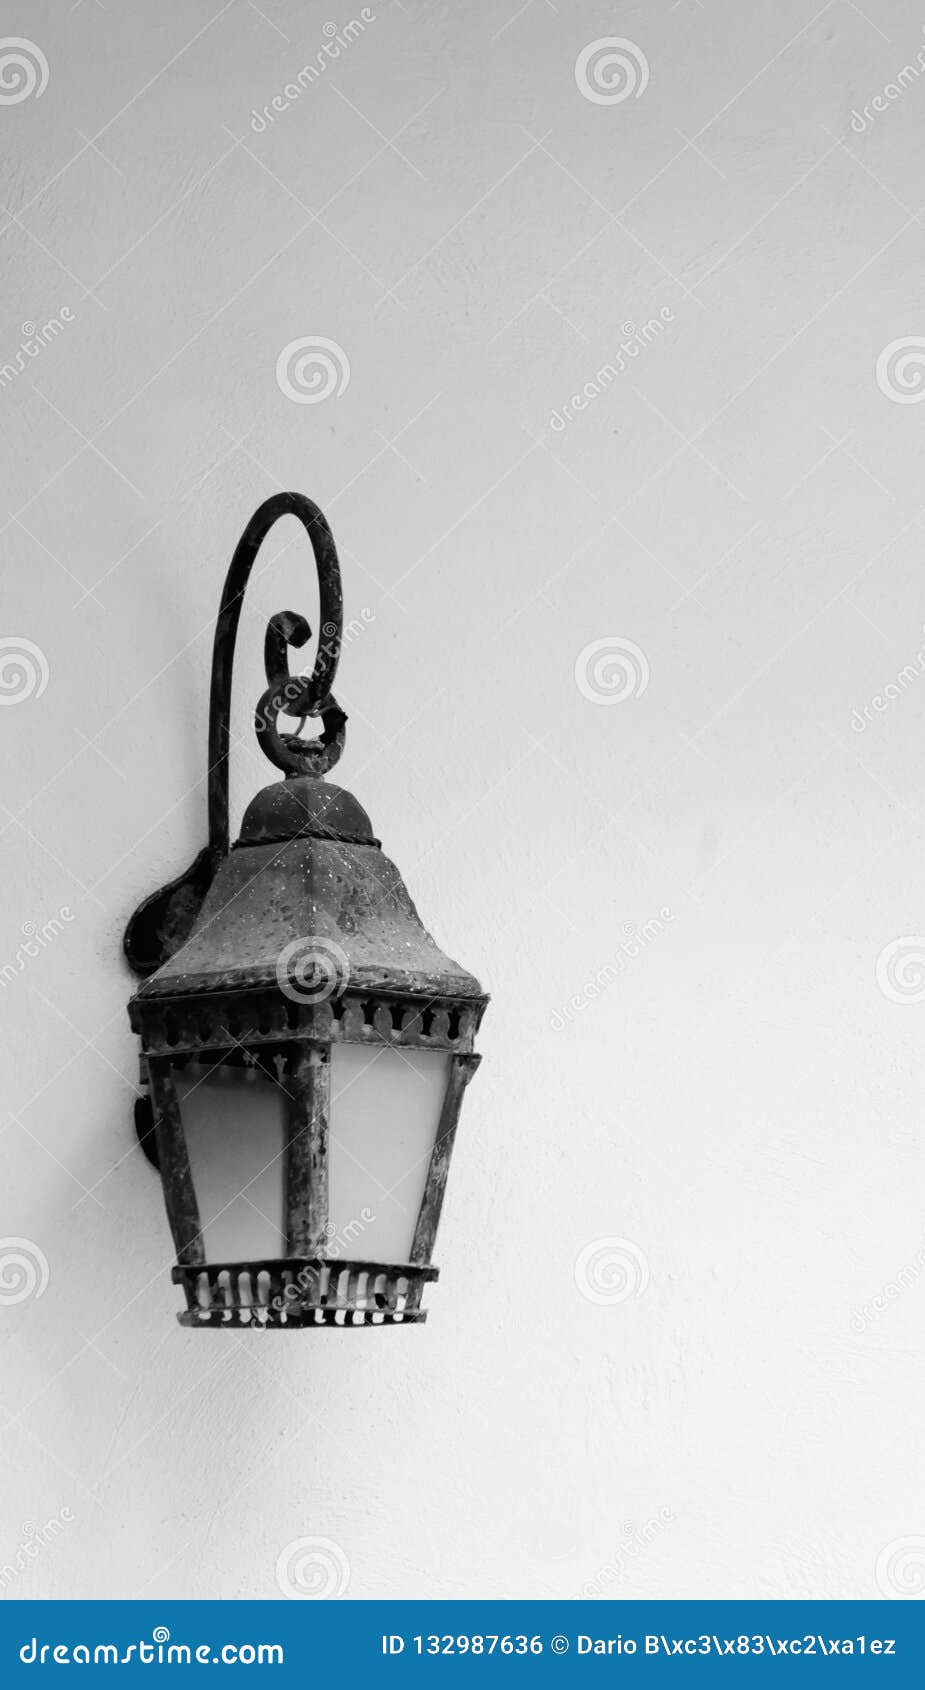 old lamp against